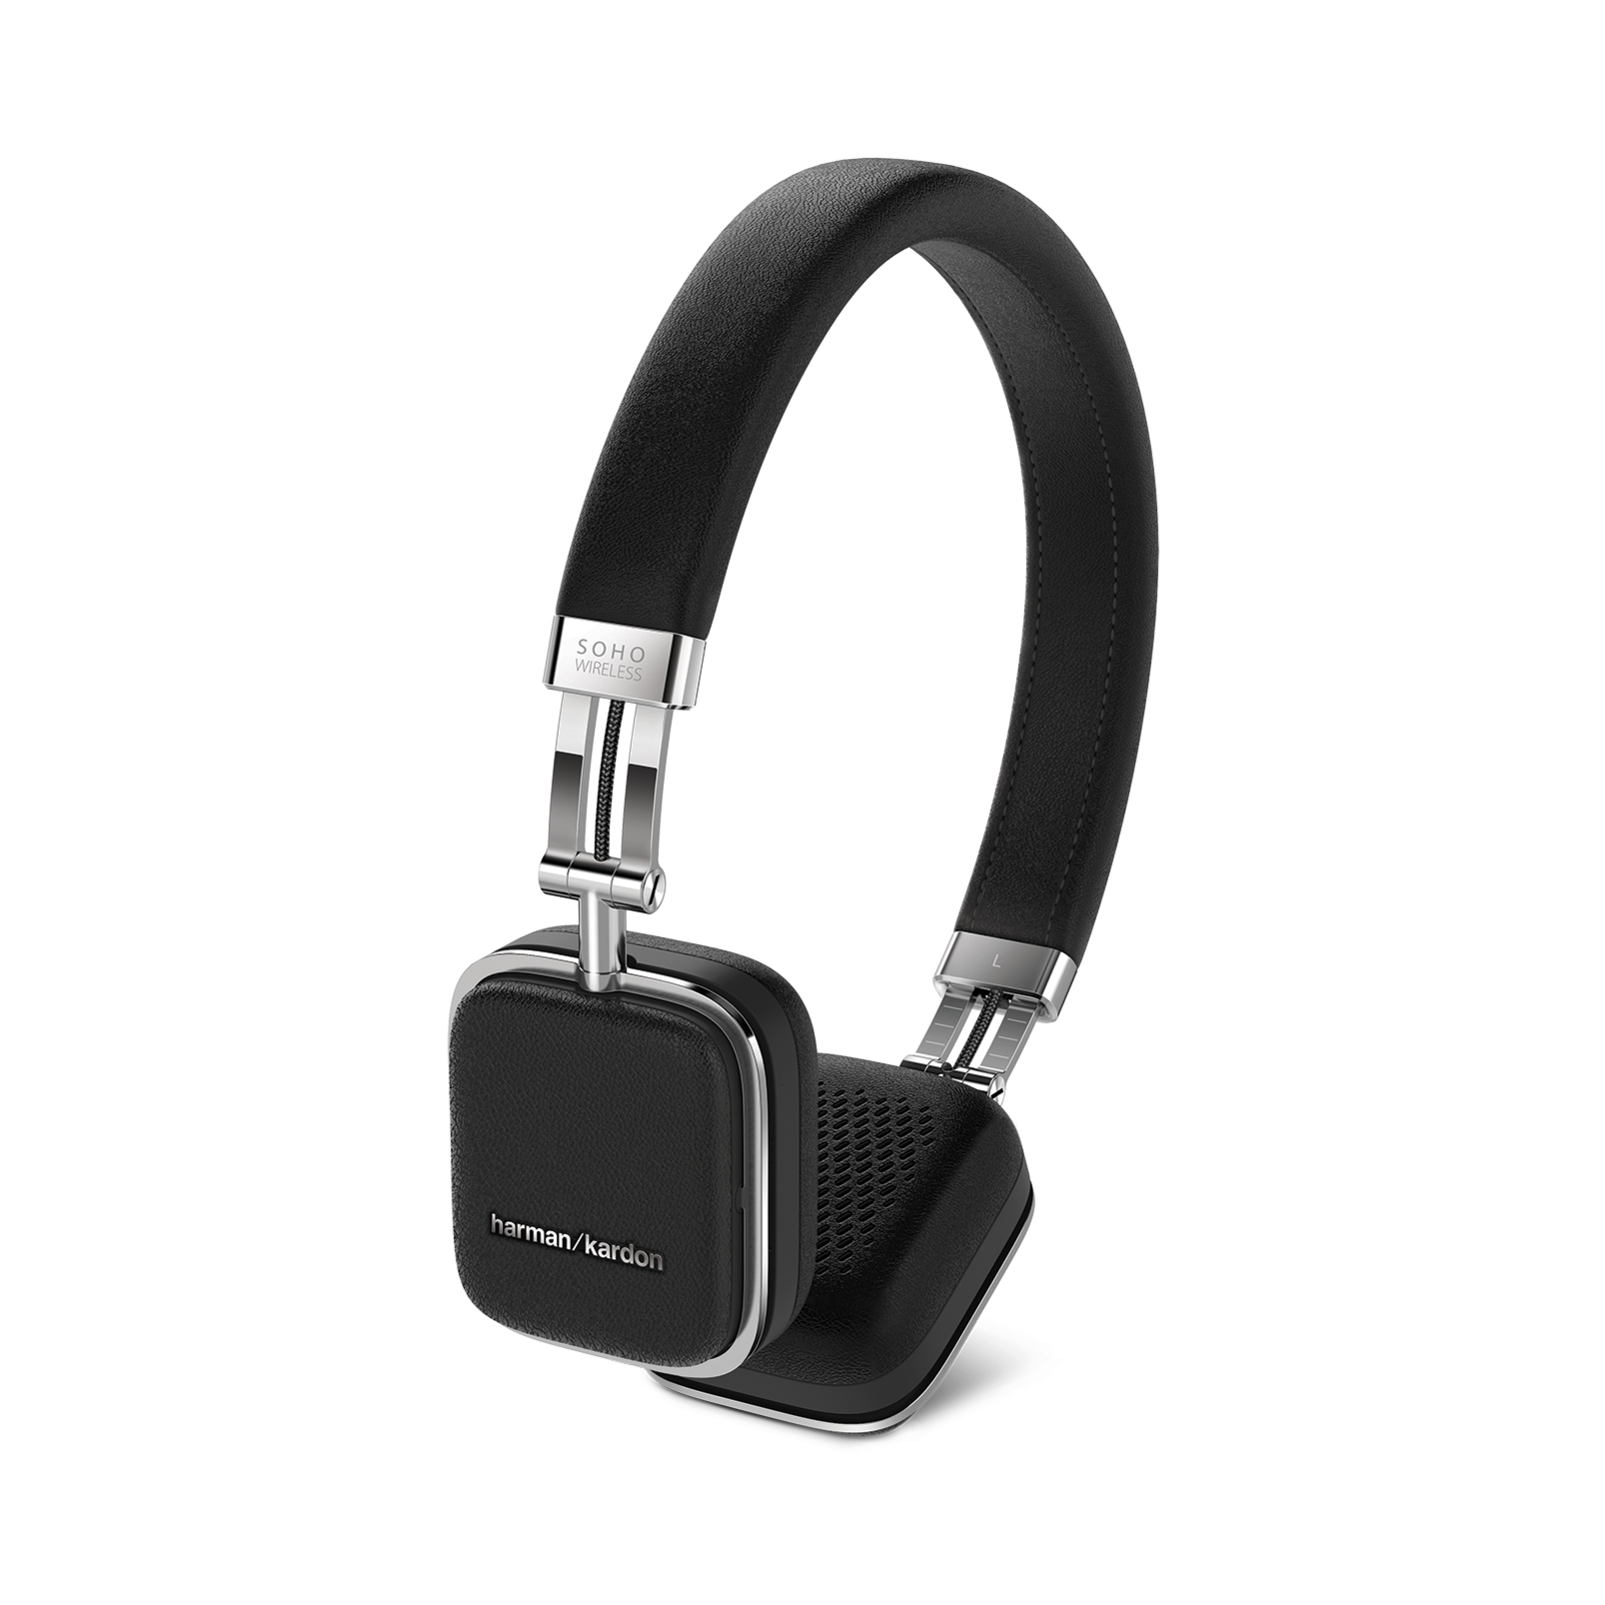 Soho Wireless - Black - Premium, on-ear headset with simplified Bluetooth® connectivity. - Front